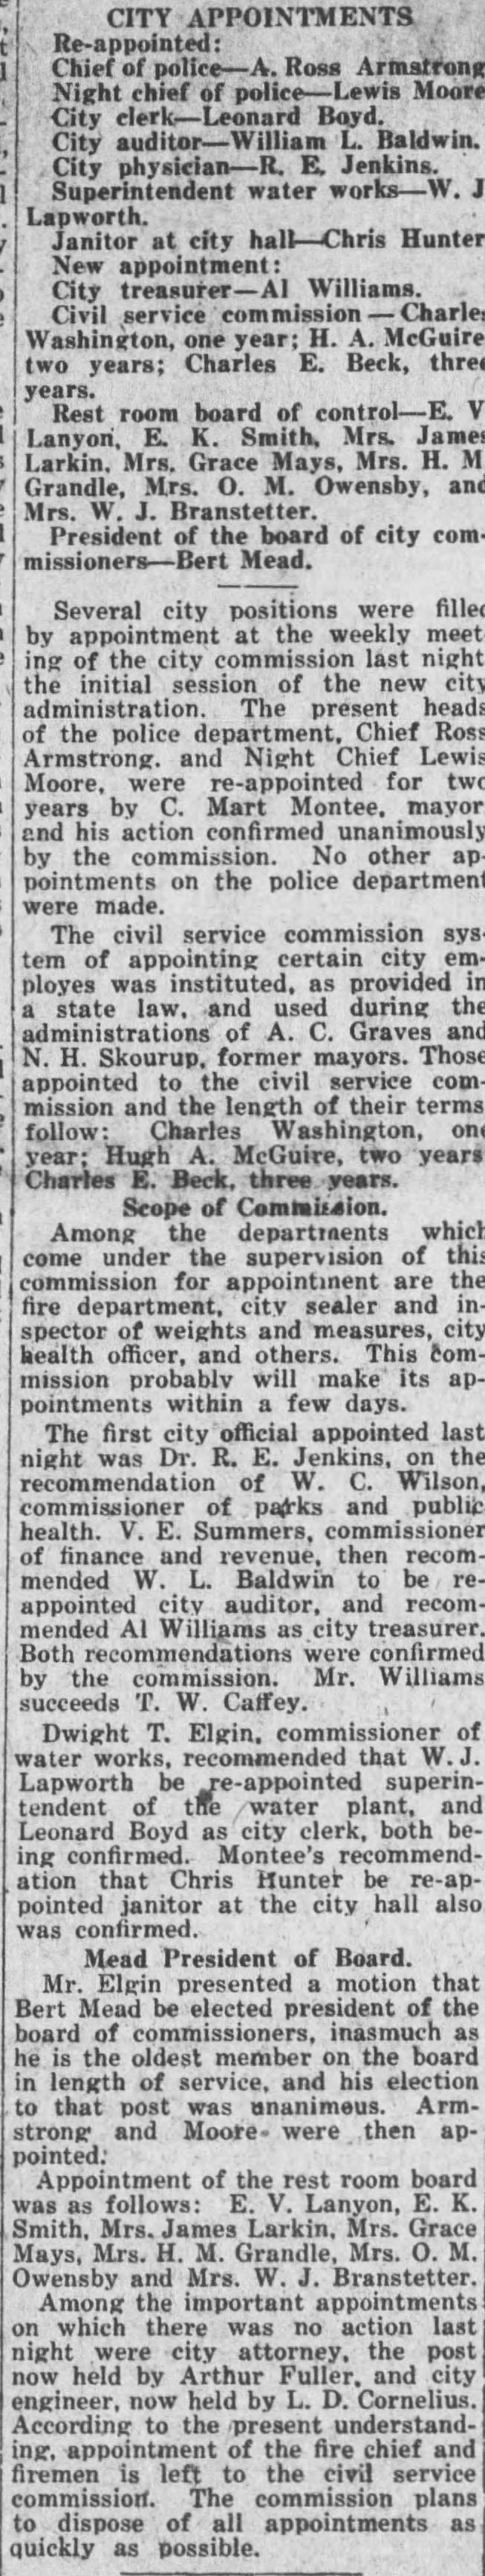 Jenkins RE reappointed city physician 1923